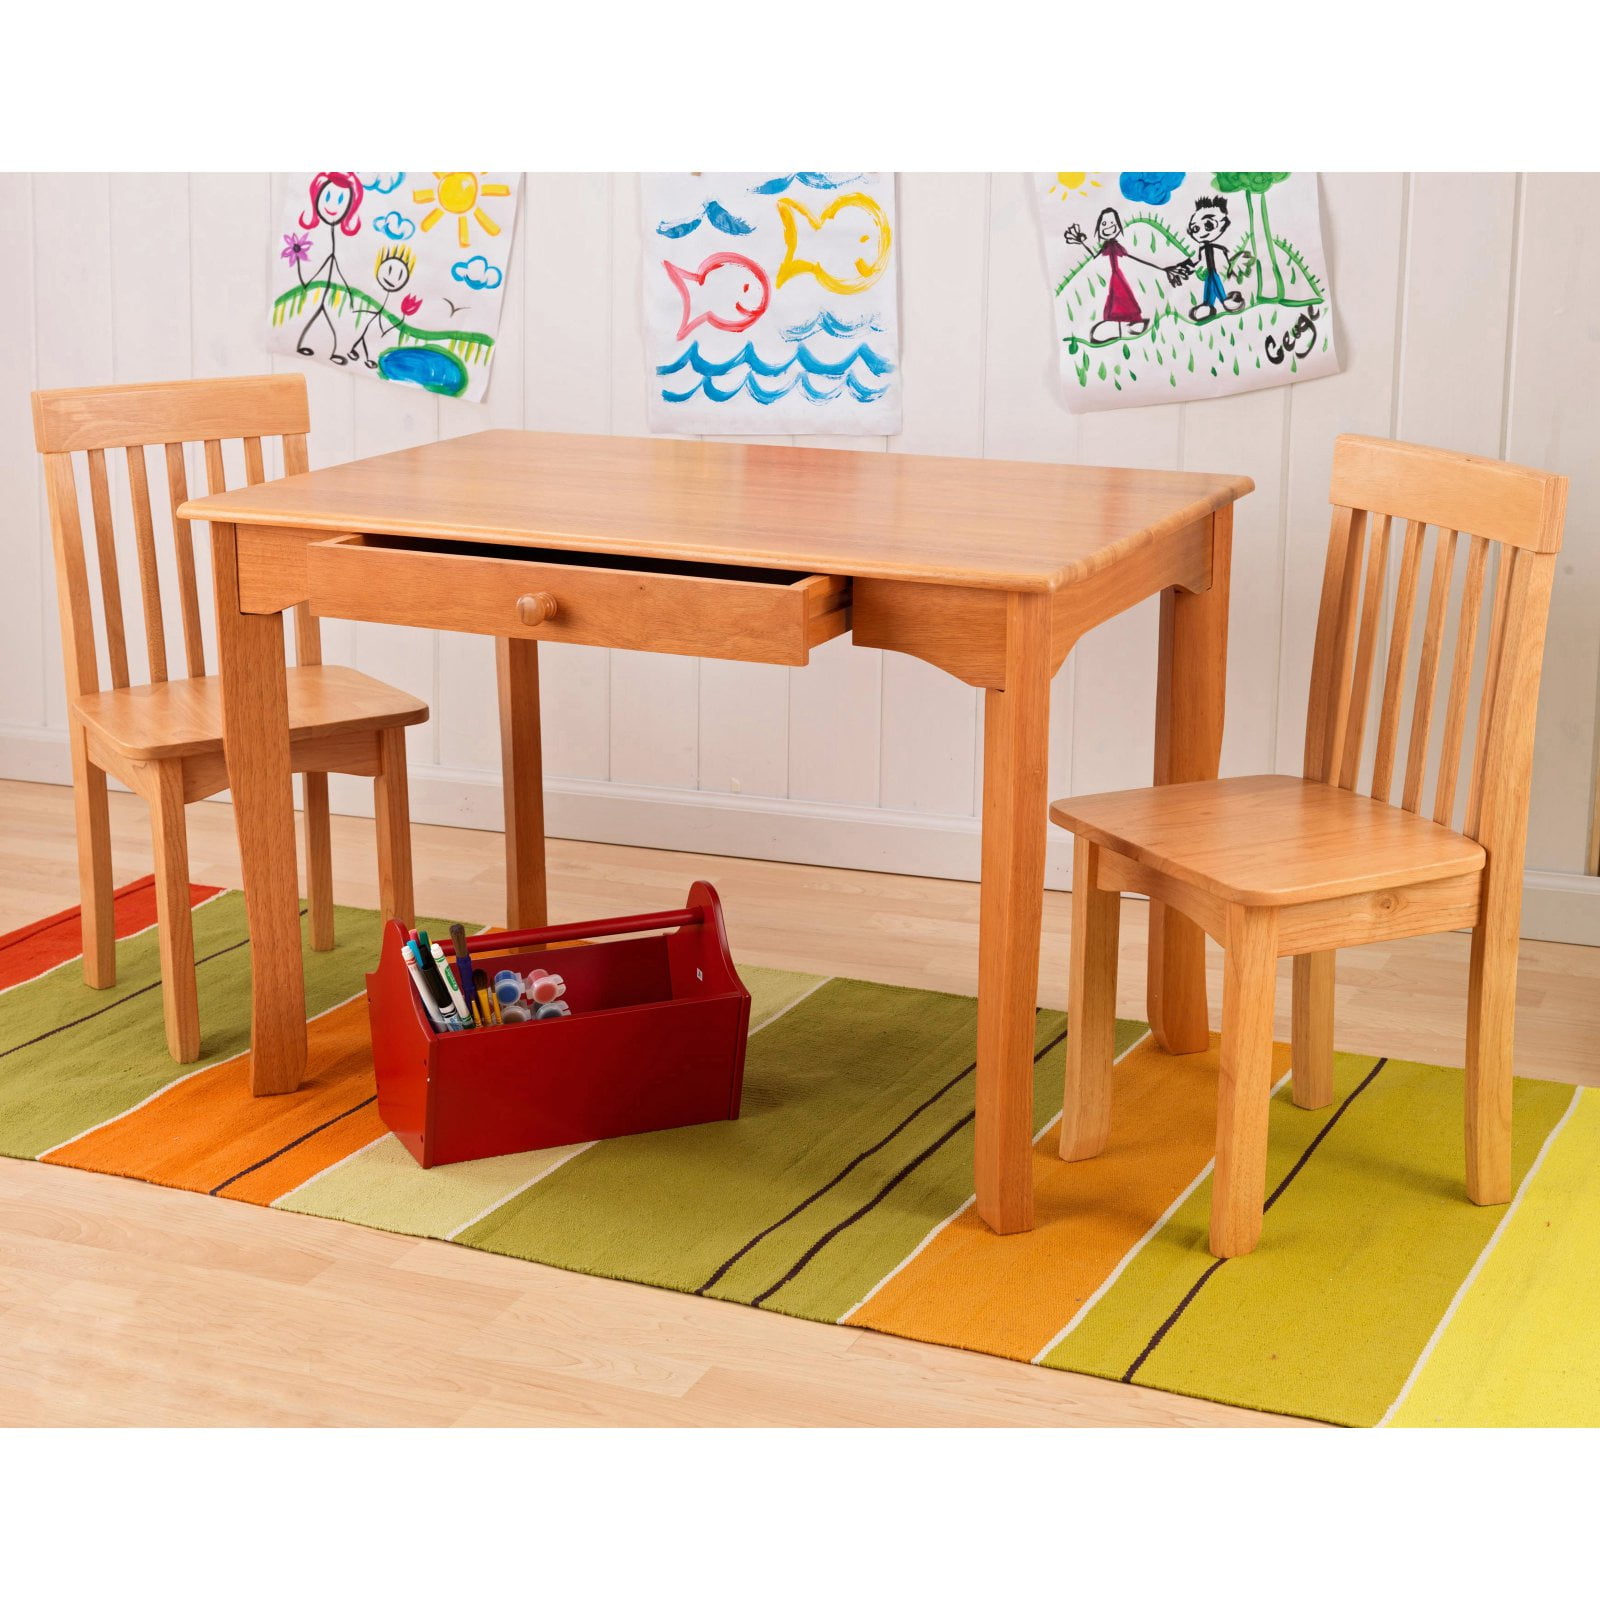 Kidkraft Avalon Table And Chair Set Natural Walmart within kidkraft avalon table and chair set – natural 26621 with regard to Home